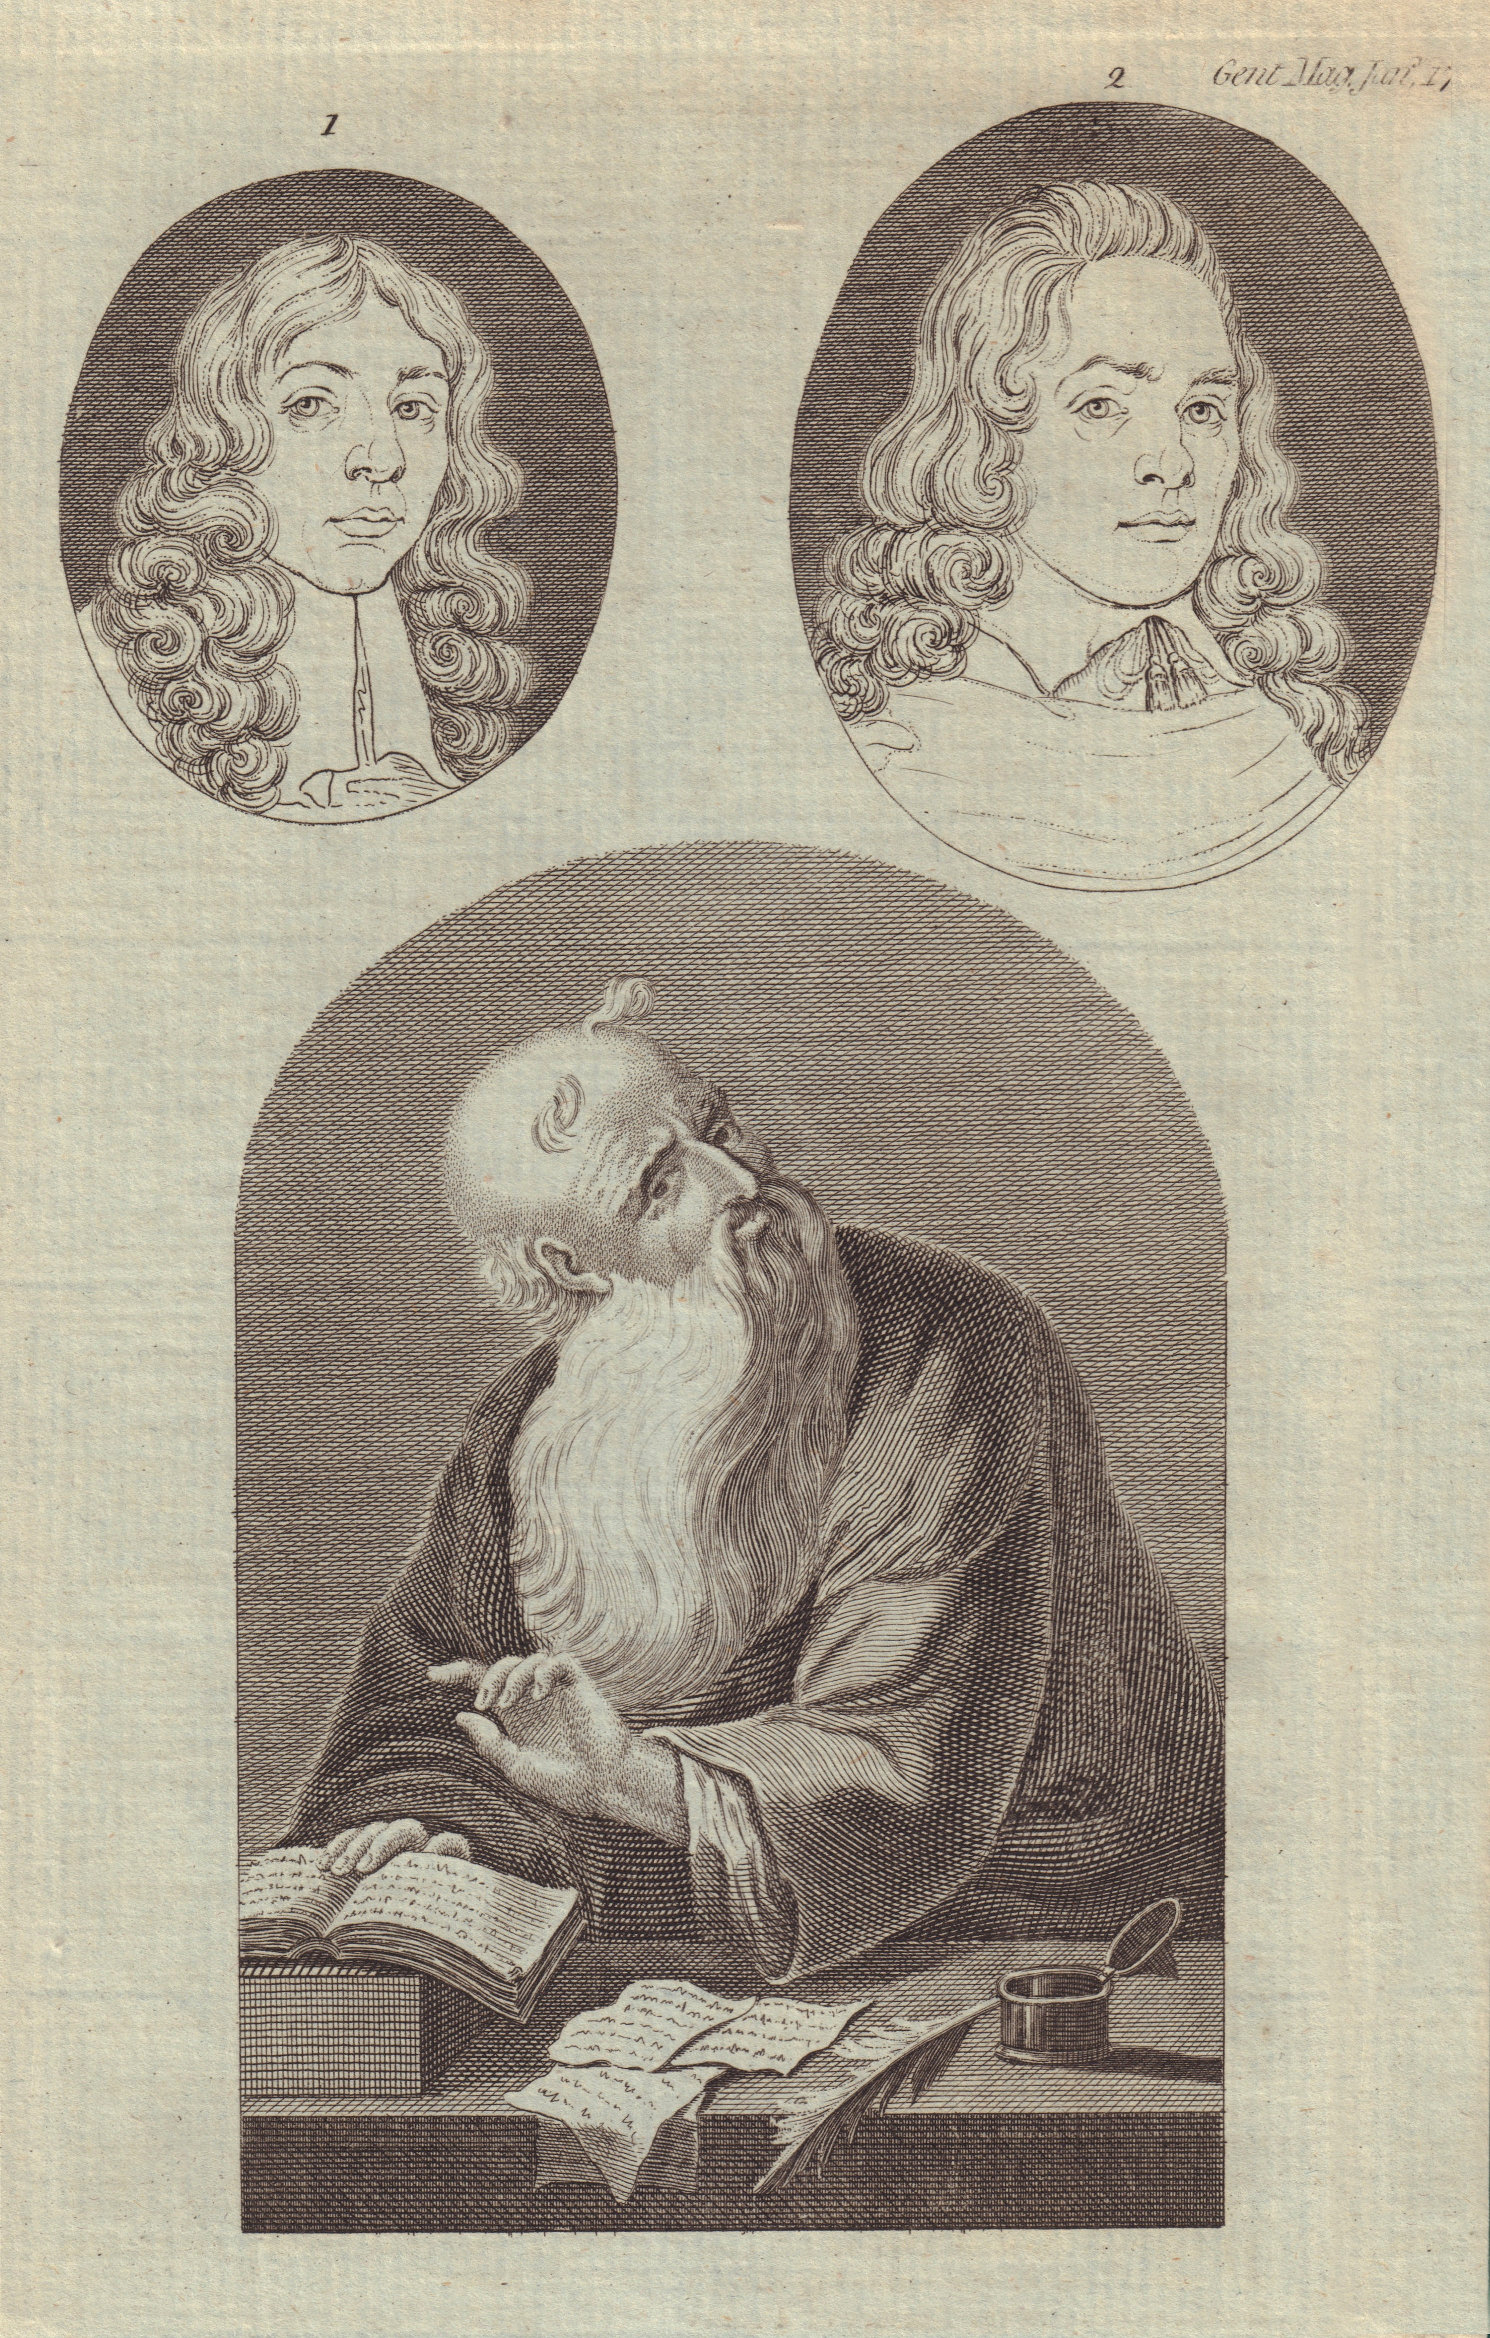 Associate Product 17th century portraits of unknown gentlemen. Old Man with a large beard 1784